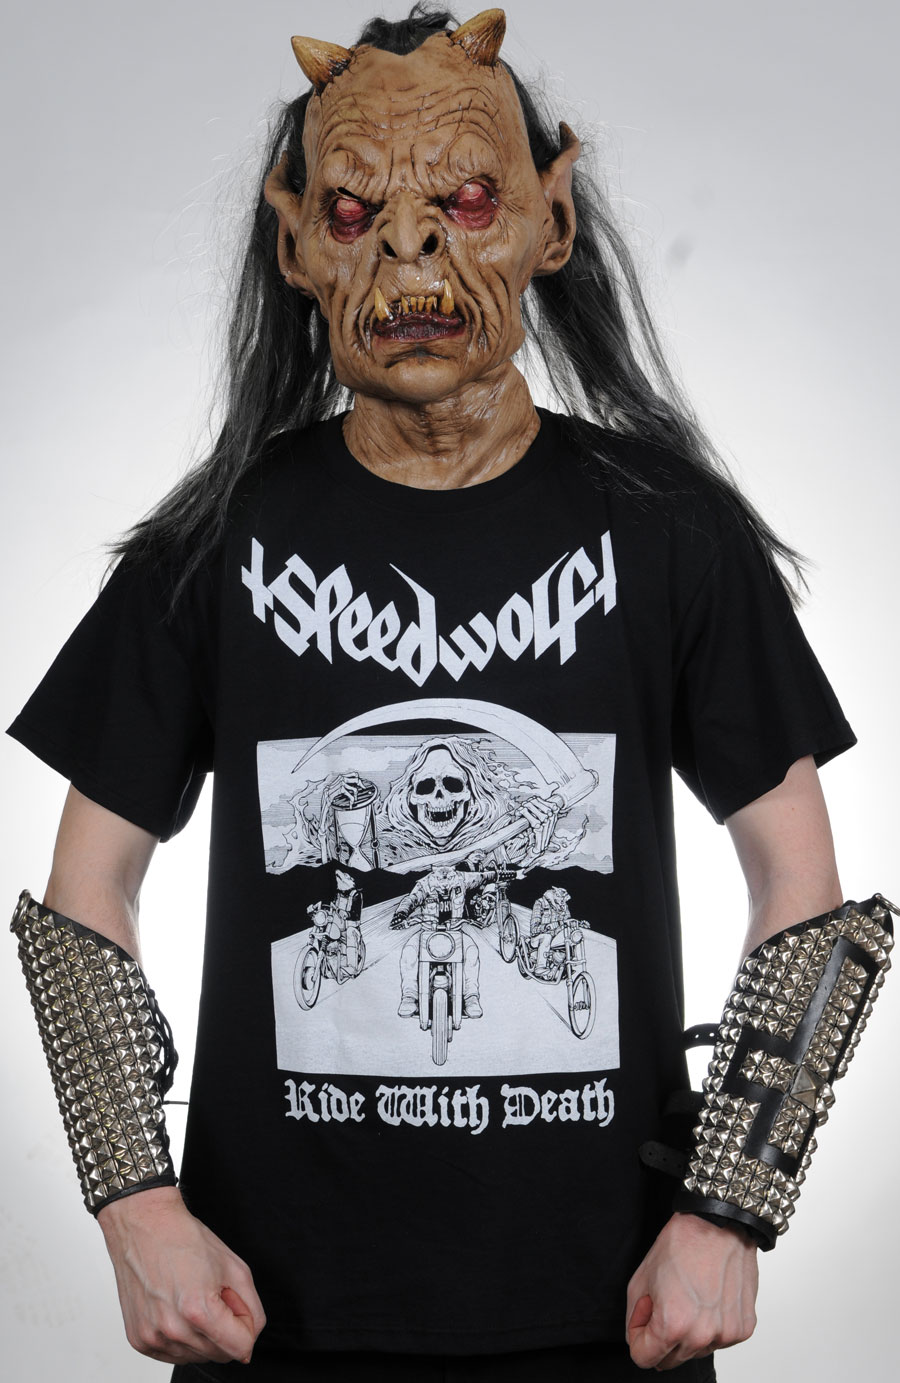 Encyclopaedia Metallum: The Metal Archives  Featuring custom t-shirts,  prints, and more